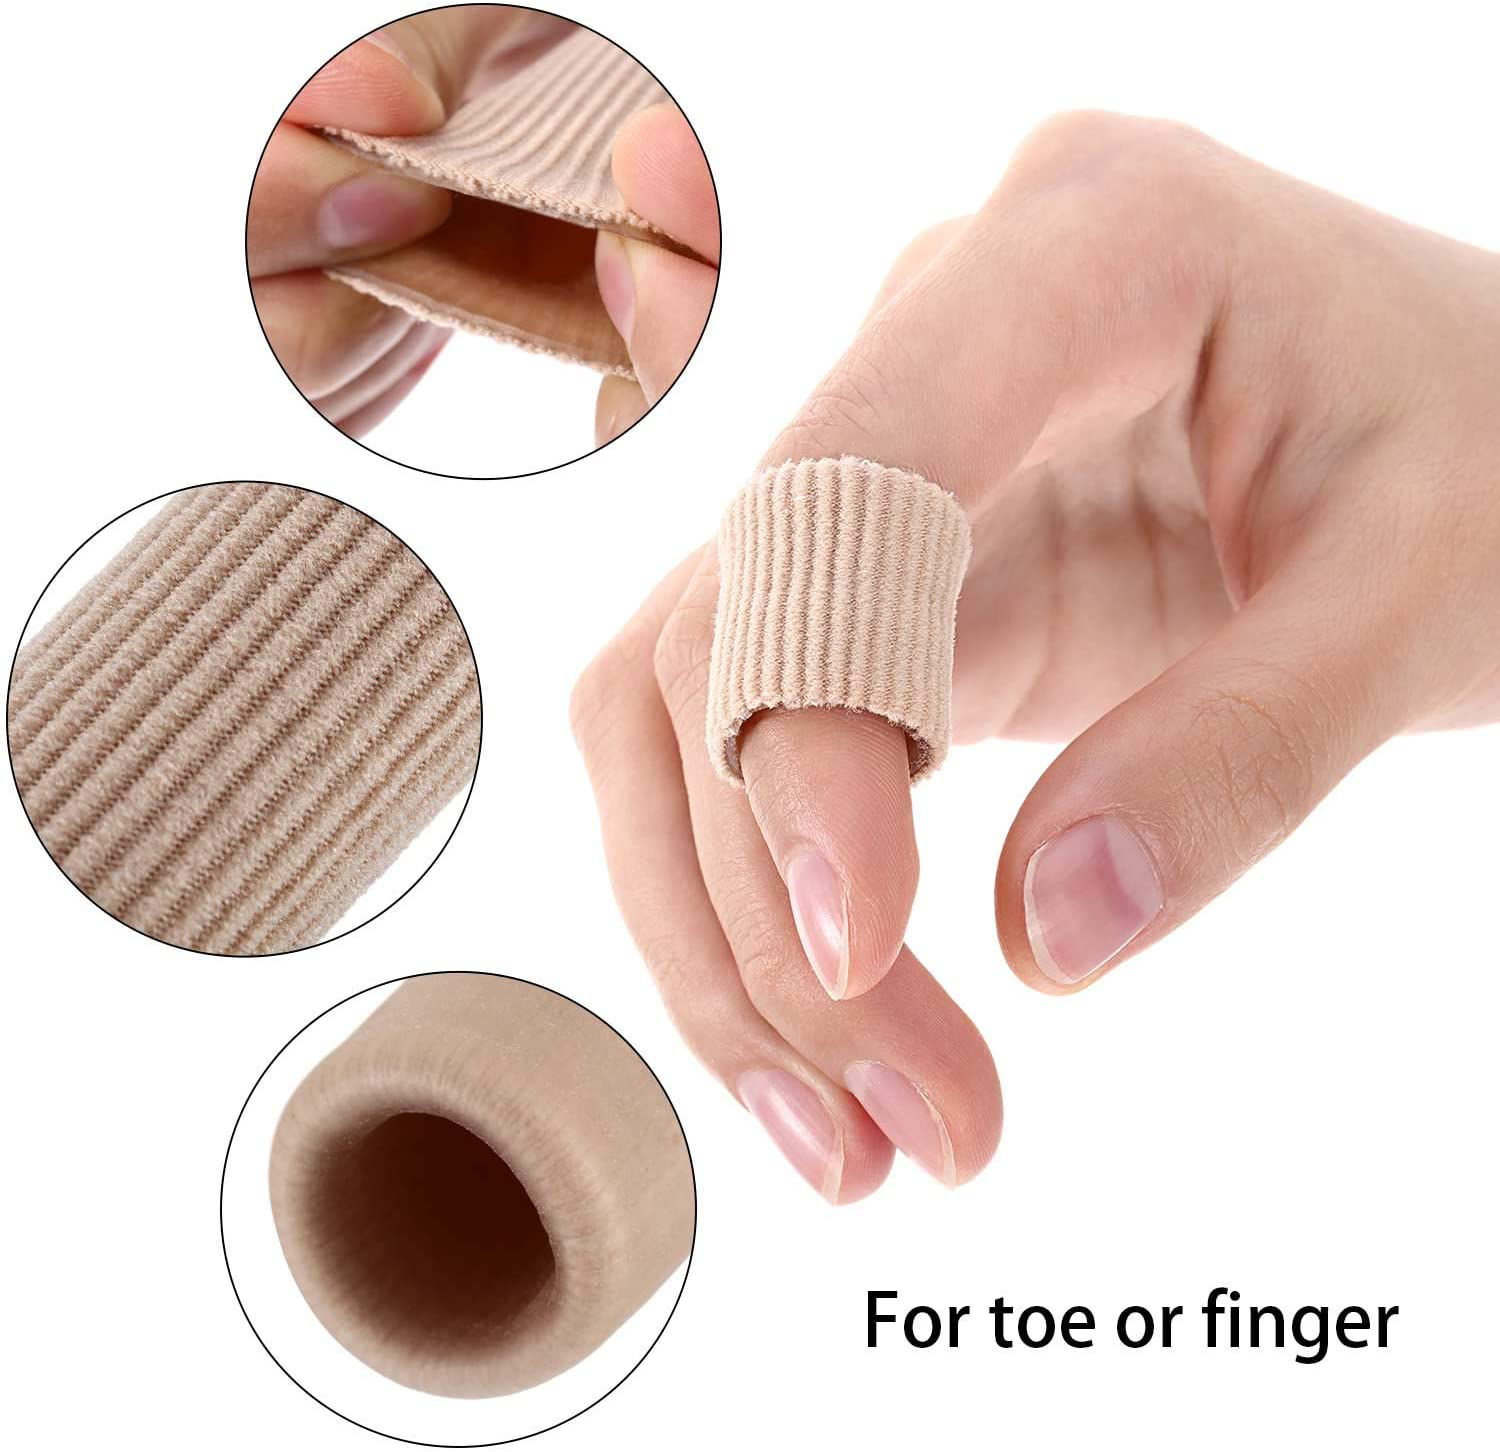 24 Pieces Toe Cushion Tube 0.98 Inches Toe Tubes Sleeves Soft Gel Corn Pad Protectors for Cushions Corns, Blisters, Calluses, Toes and Fingers, 3 Size (Mixed Size Toe Cushion Tube, 24 Pieces)